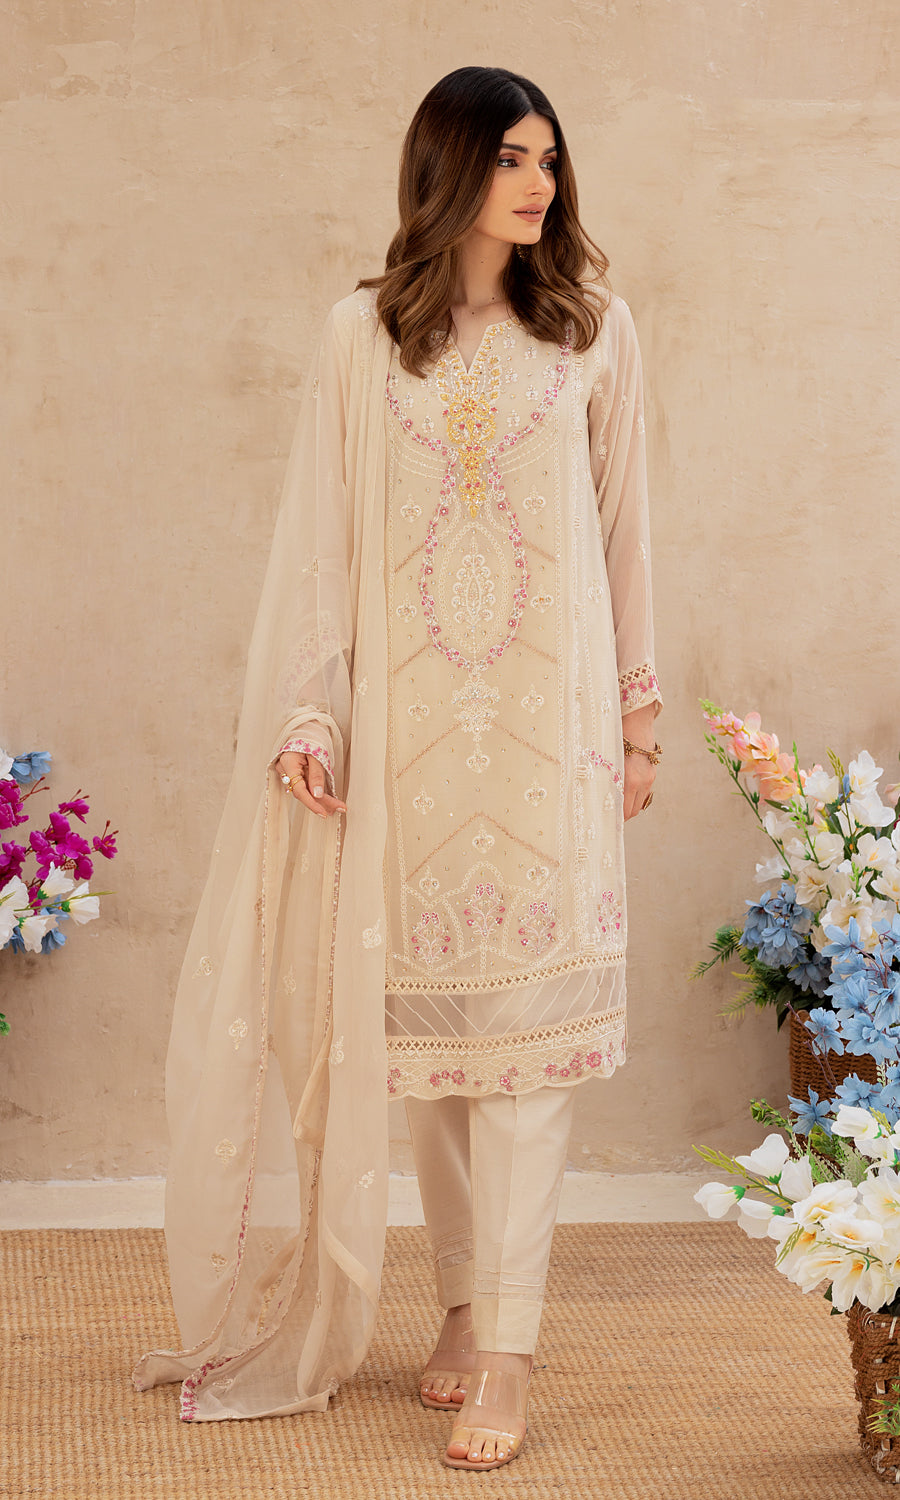 Shamooz- Mushq volume 3. This elegance with style masterpiece with pastel color and embrodiery work on the front and side panel that enhances a blush of color.This elegant hand-embellished add-on sparkle of glamour.This ensemble is a perfect balance of every occassion.